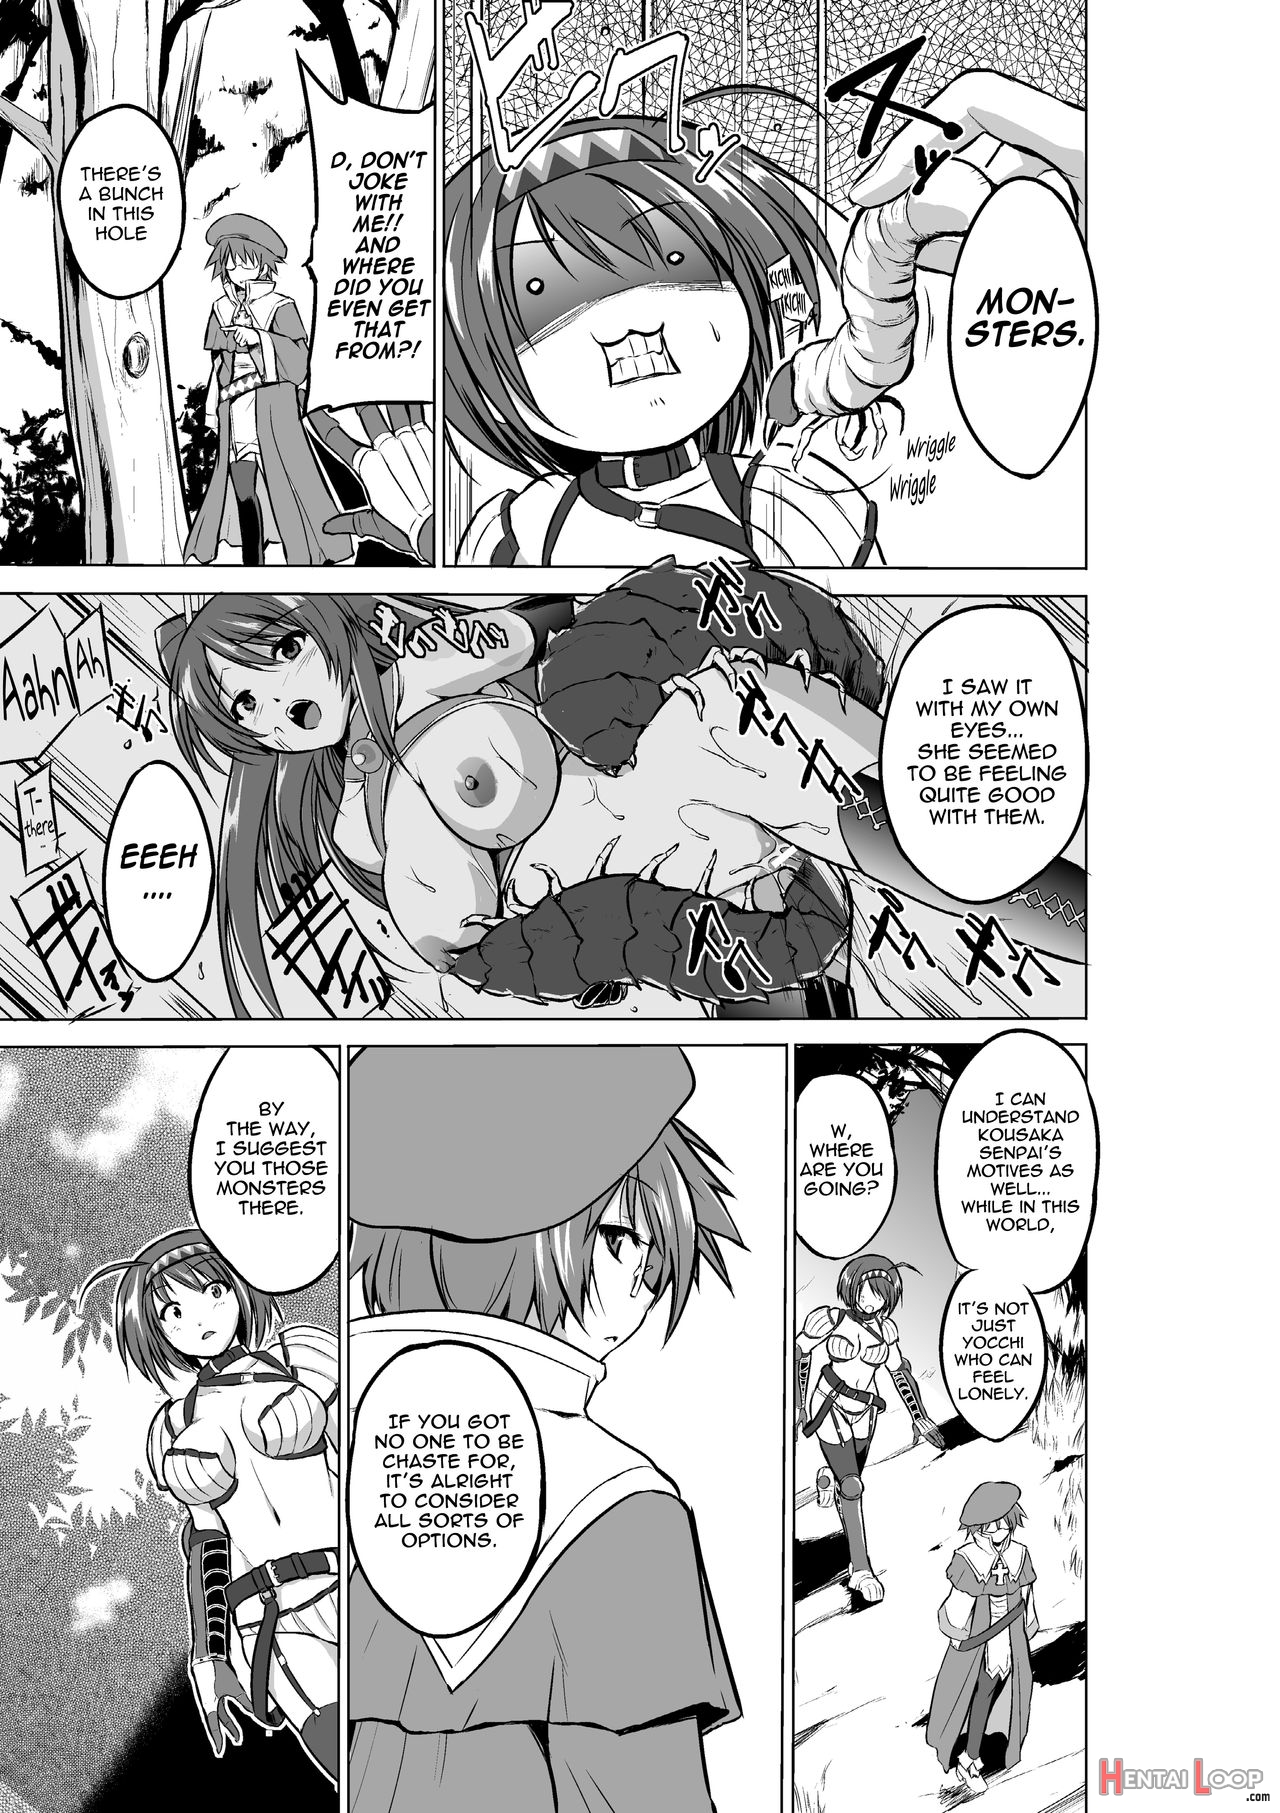 Dungeon Travelers – Chie No Himegoto page 4